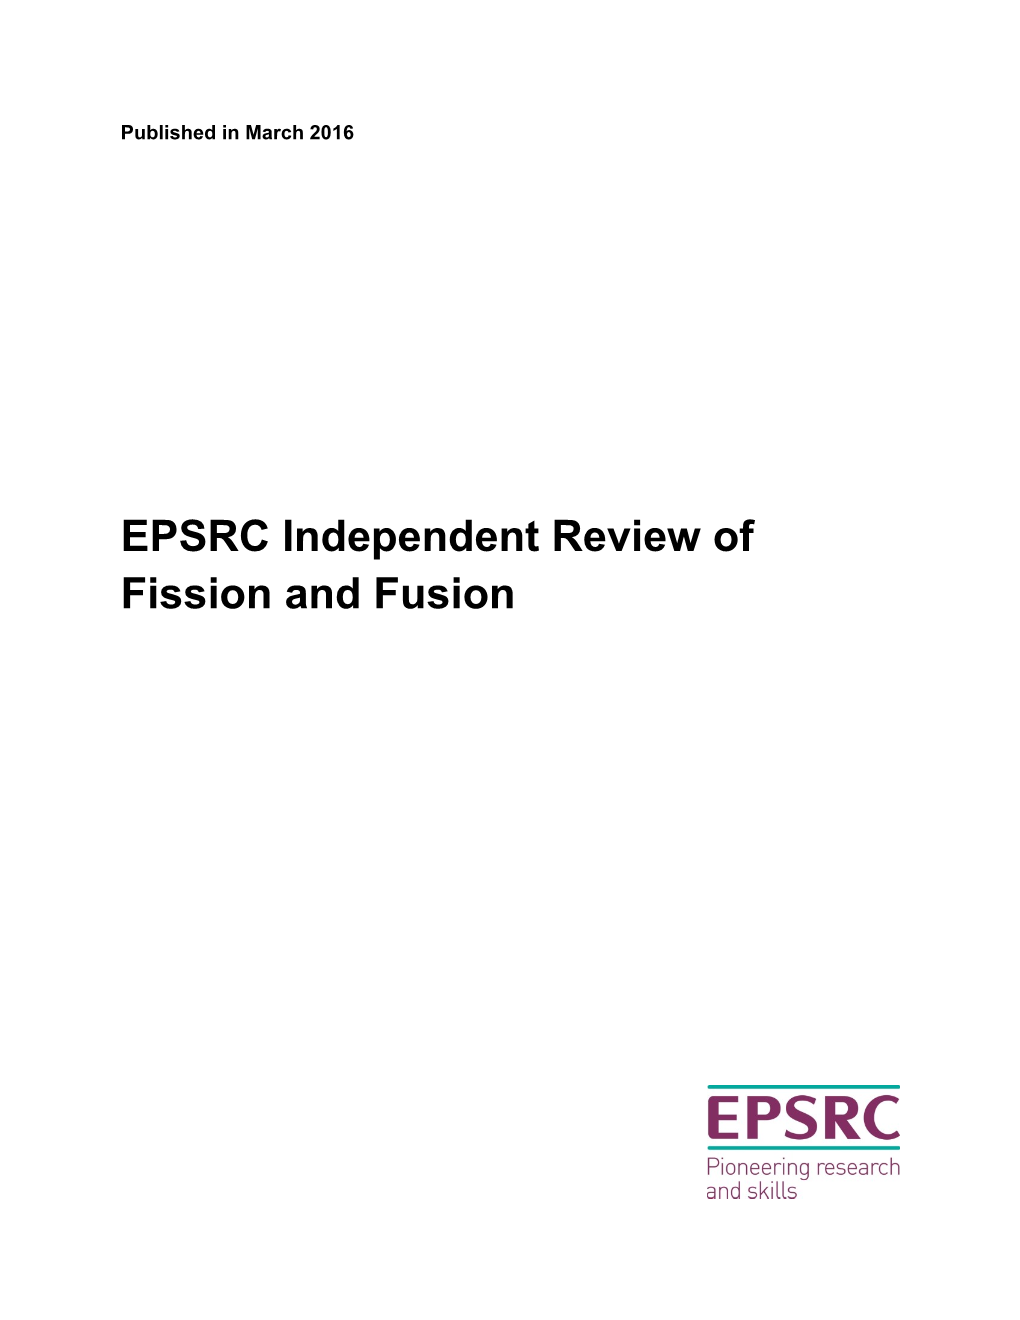 EPSRC Independent Review of Fission and Fusion